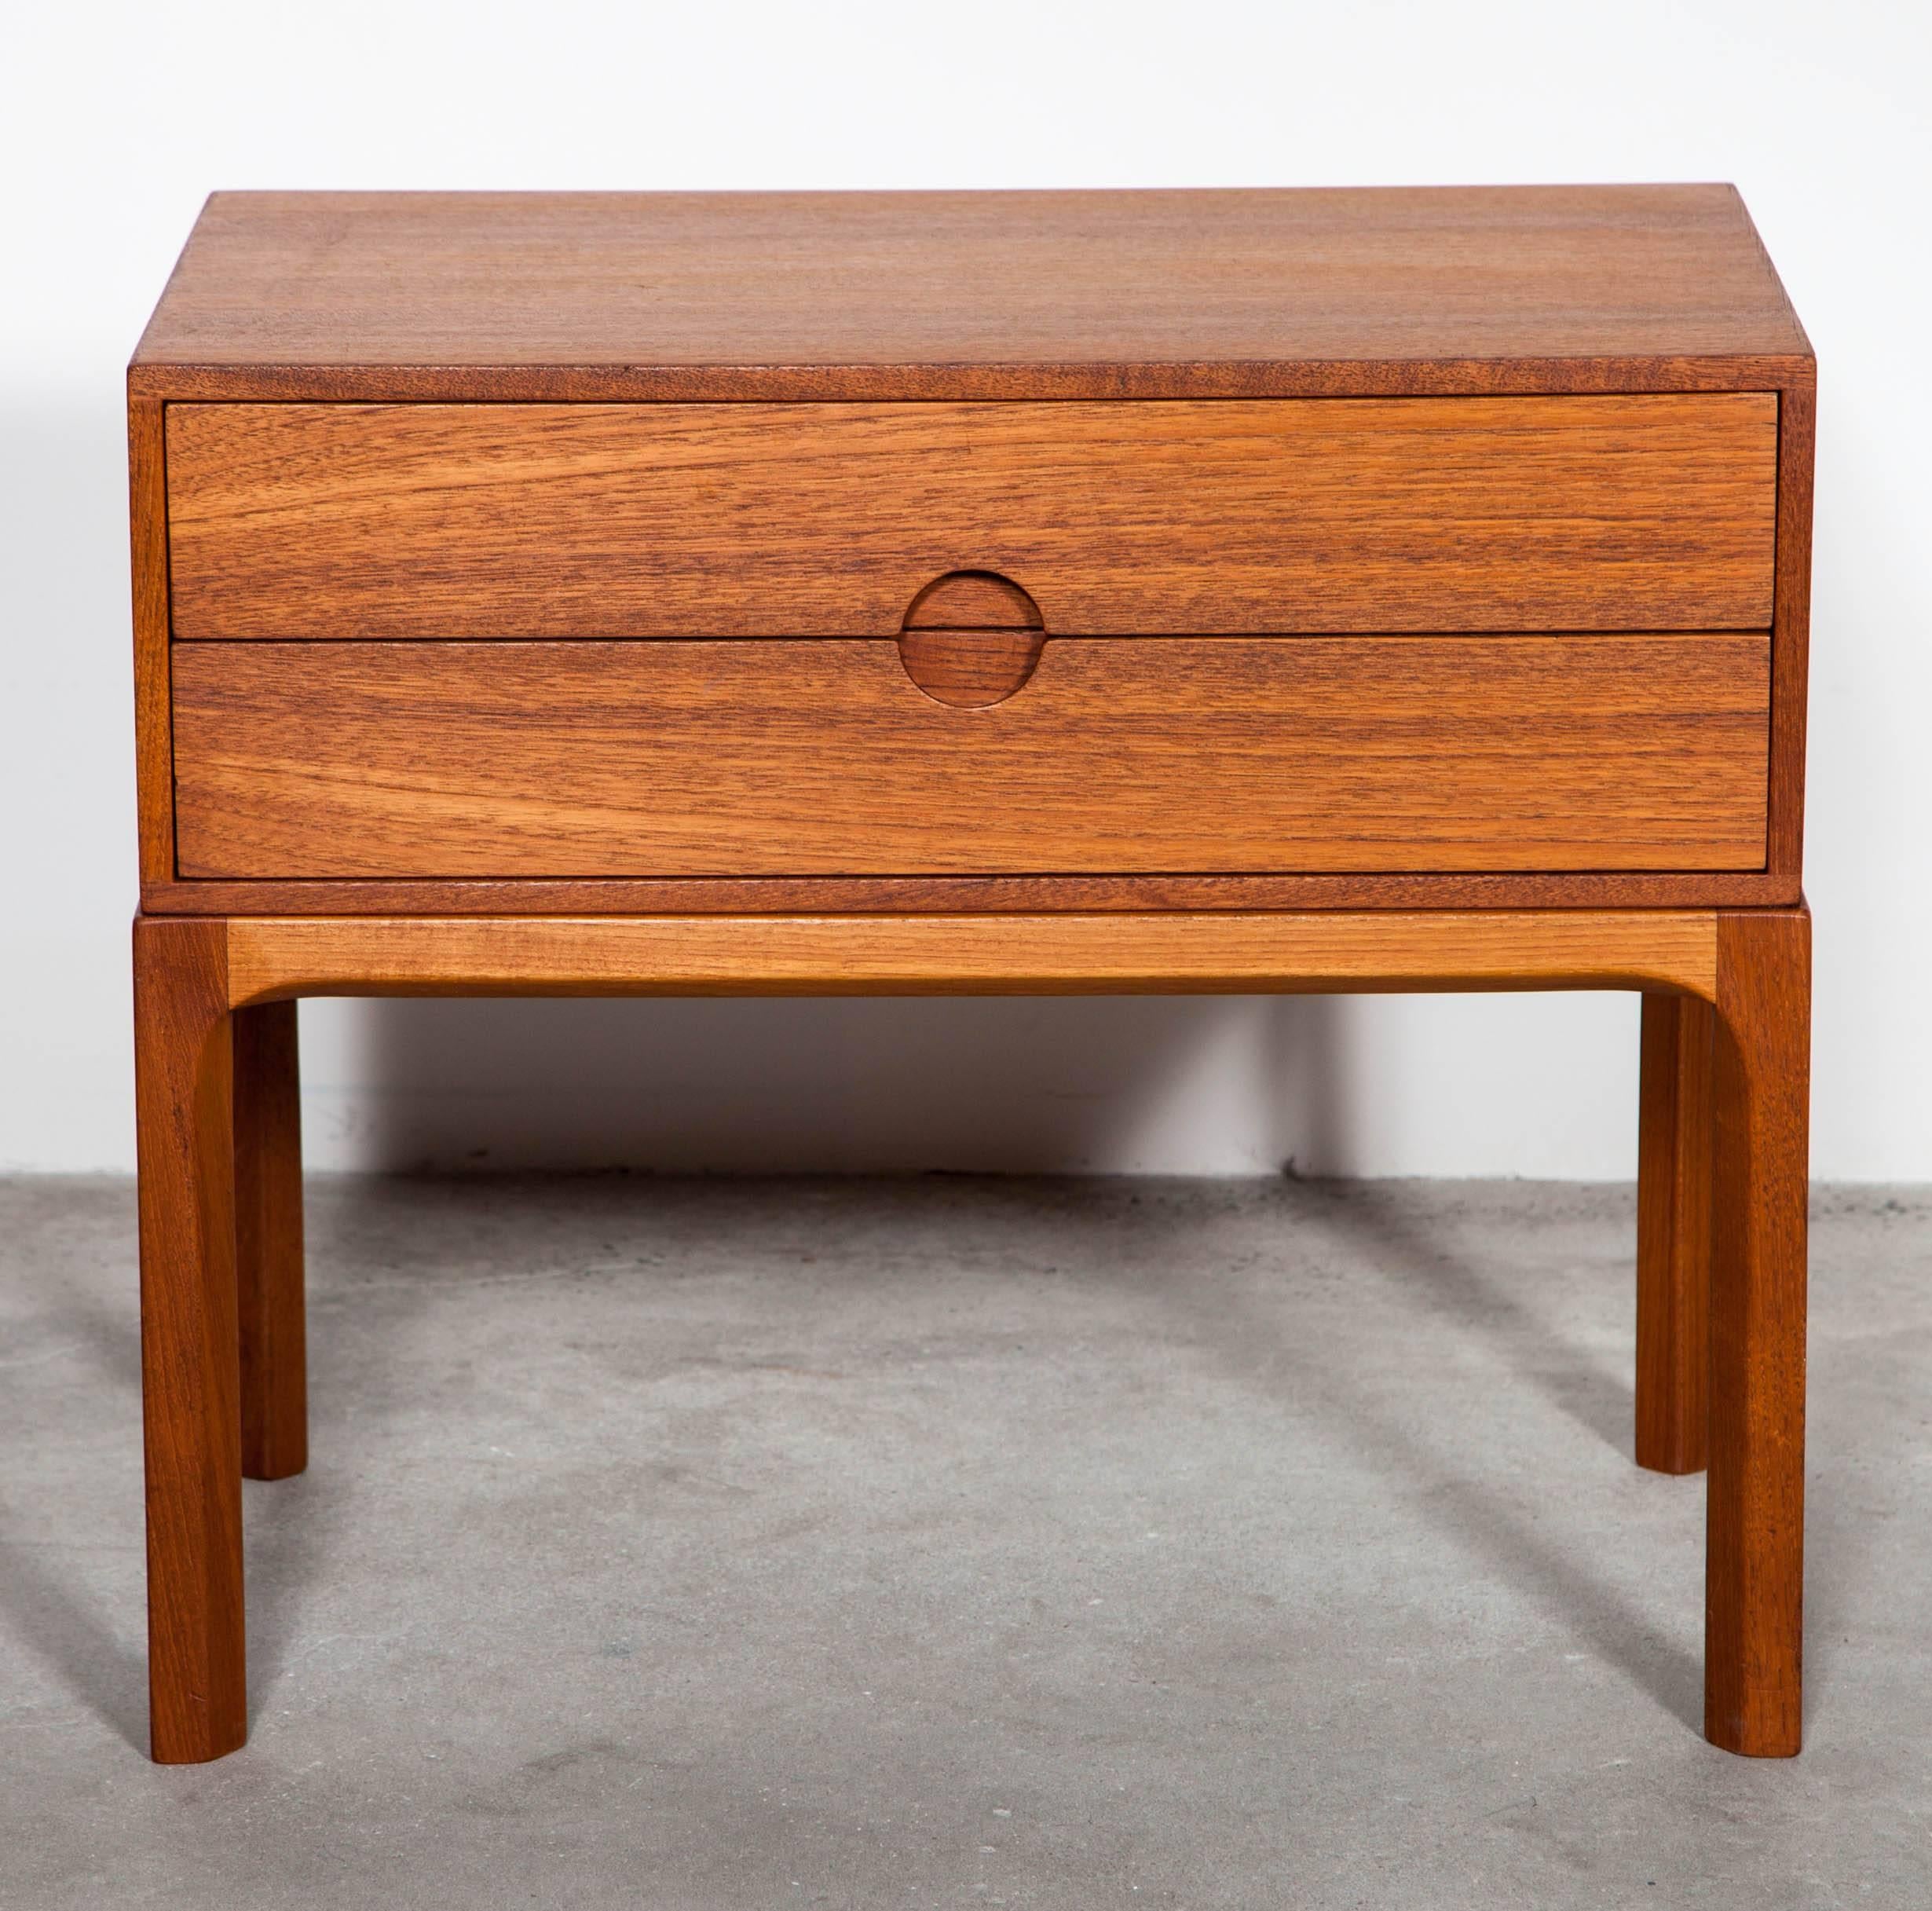 Vintage 1960s Askel Kjærsgaard Bedside Table in Teak

This Danish Modern Night Stand are in excellent condition. Warm and harmonious and mixes with many styles. Ready for pick up, delivery, or shipping.